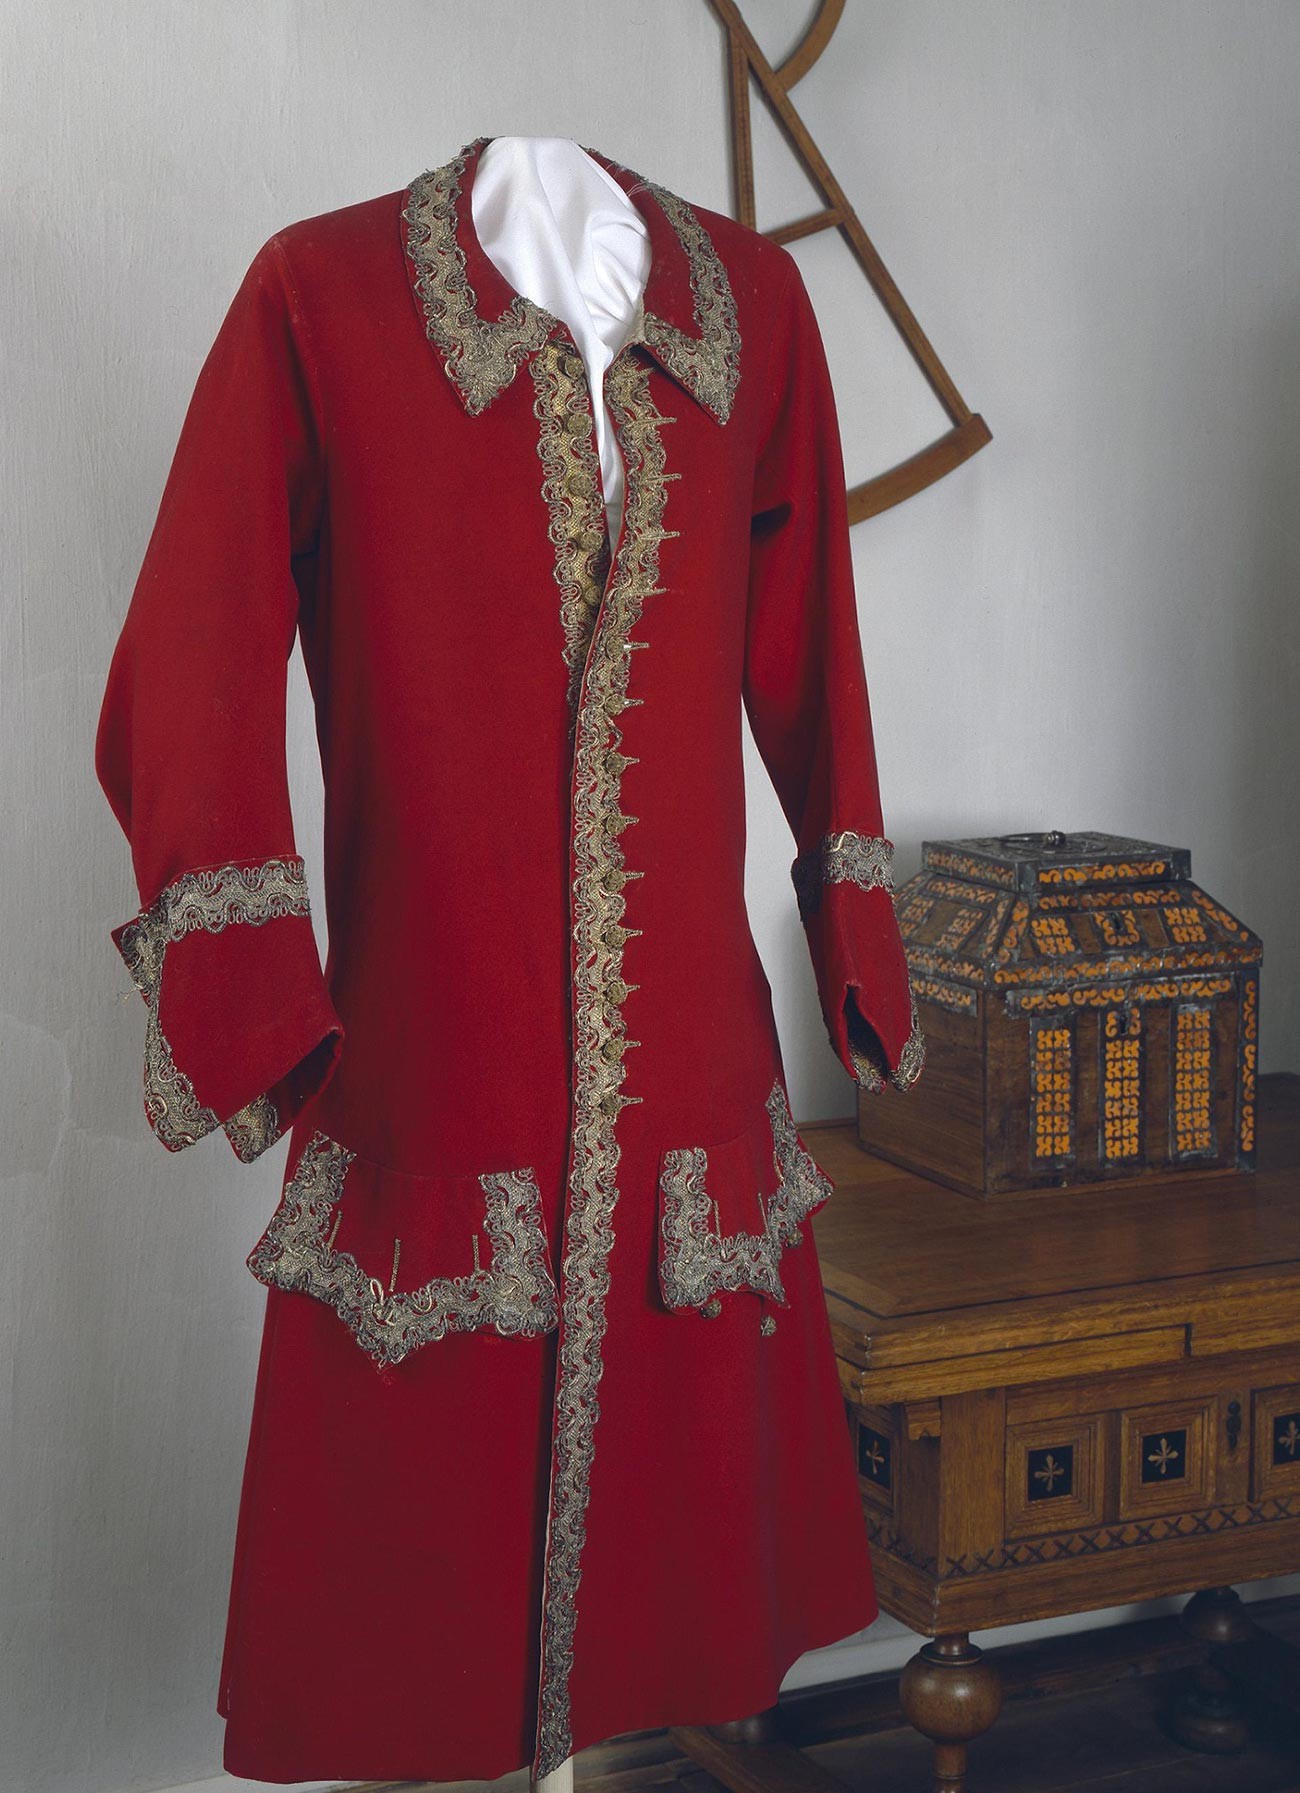 Peter the Great's ceremonial kaftan (a kind of jacket)